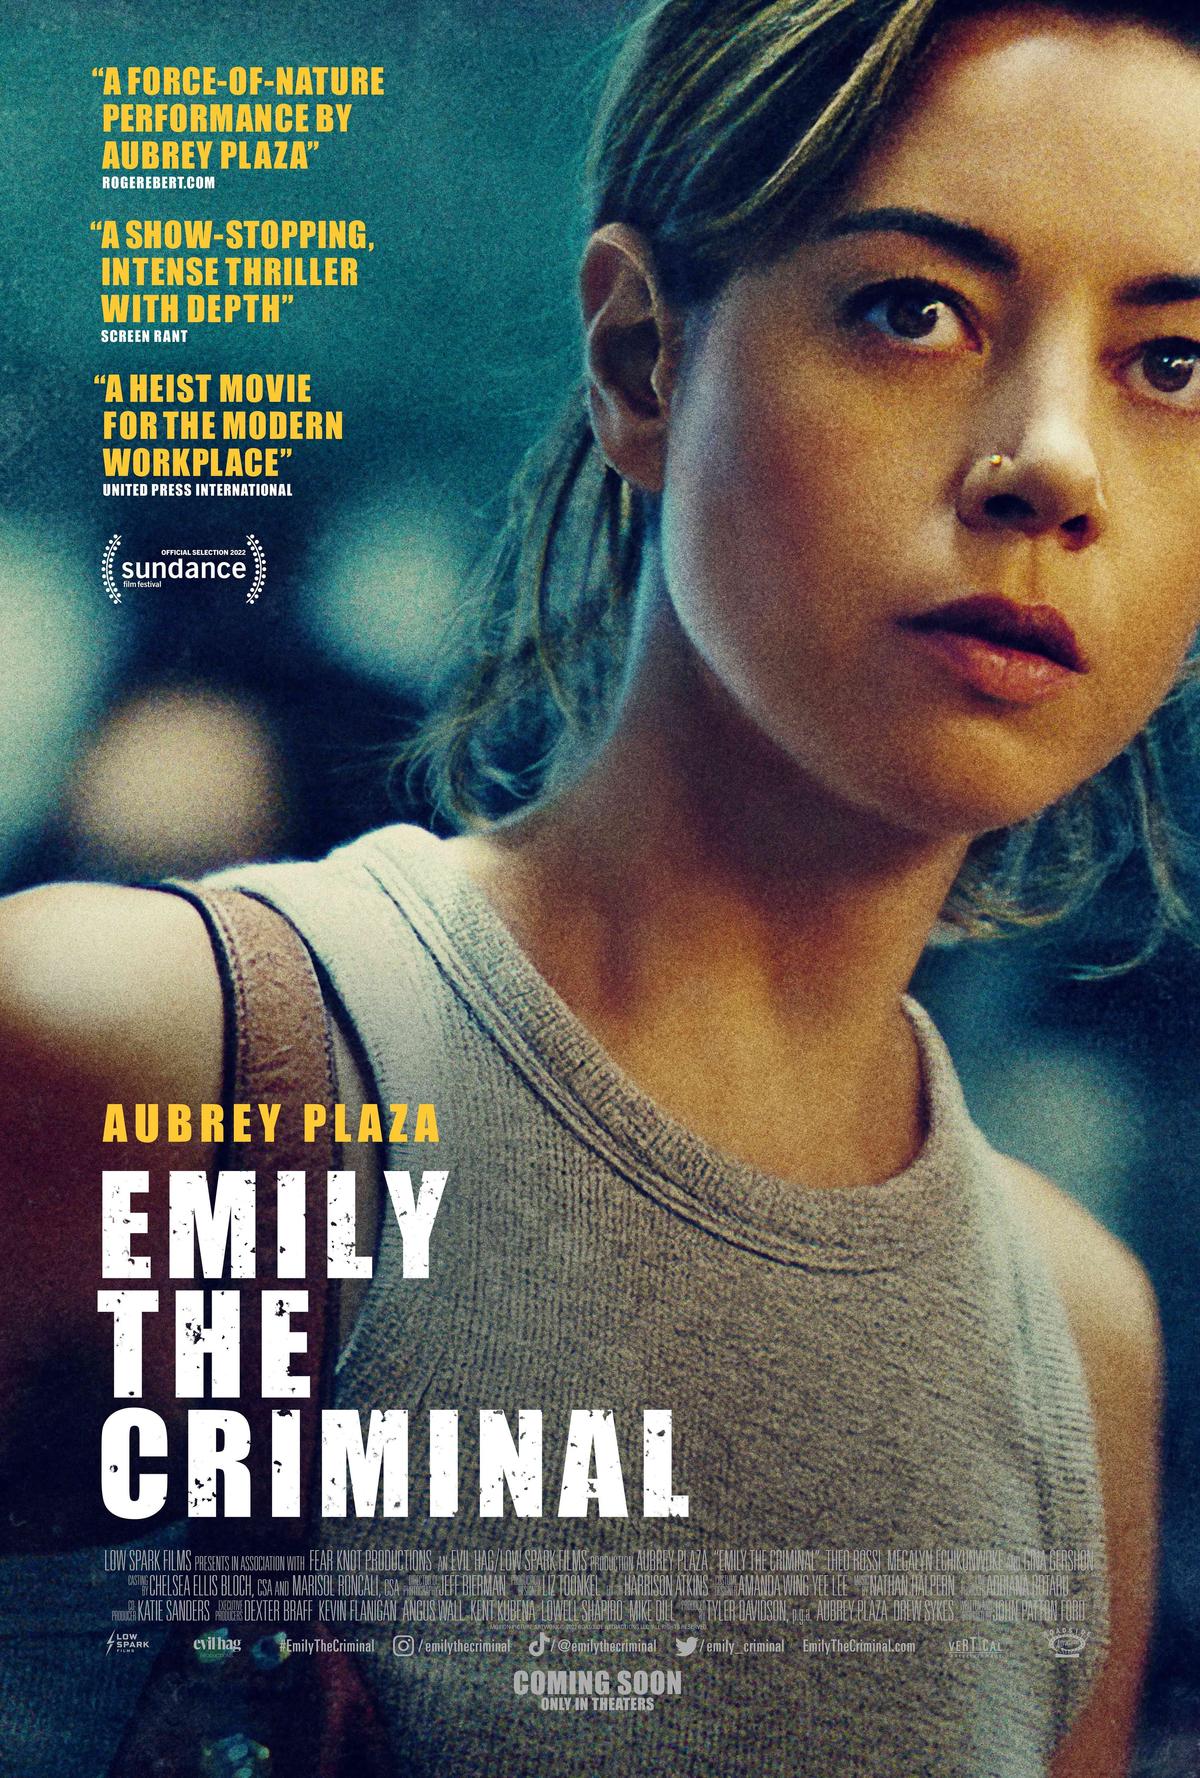 Movie poster for "Emily the Criminal."